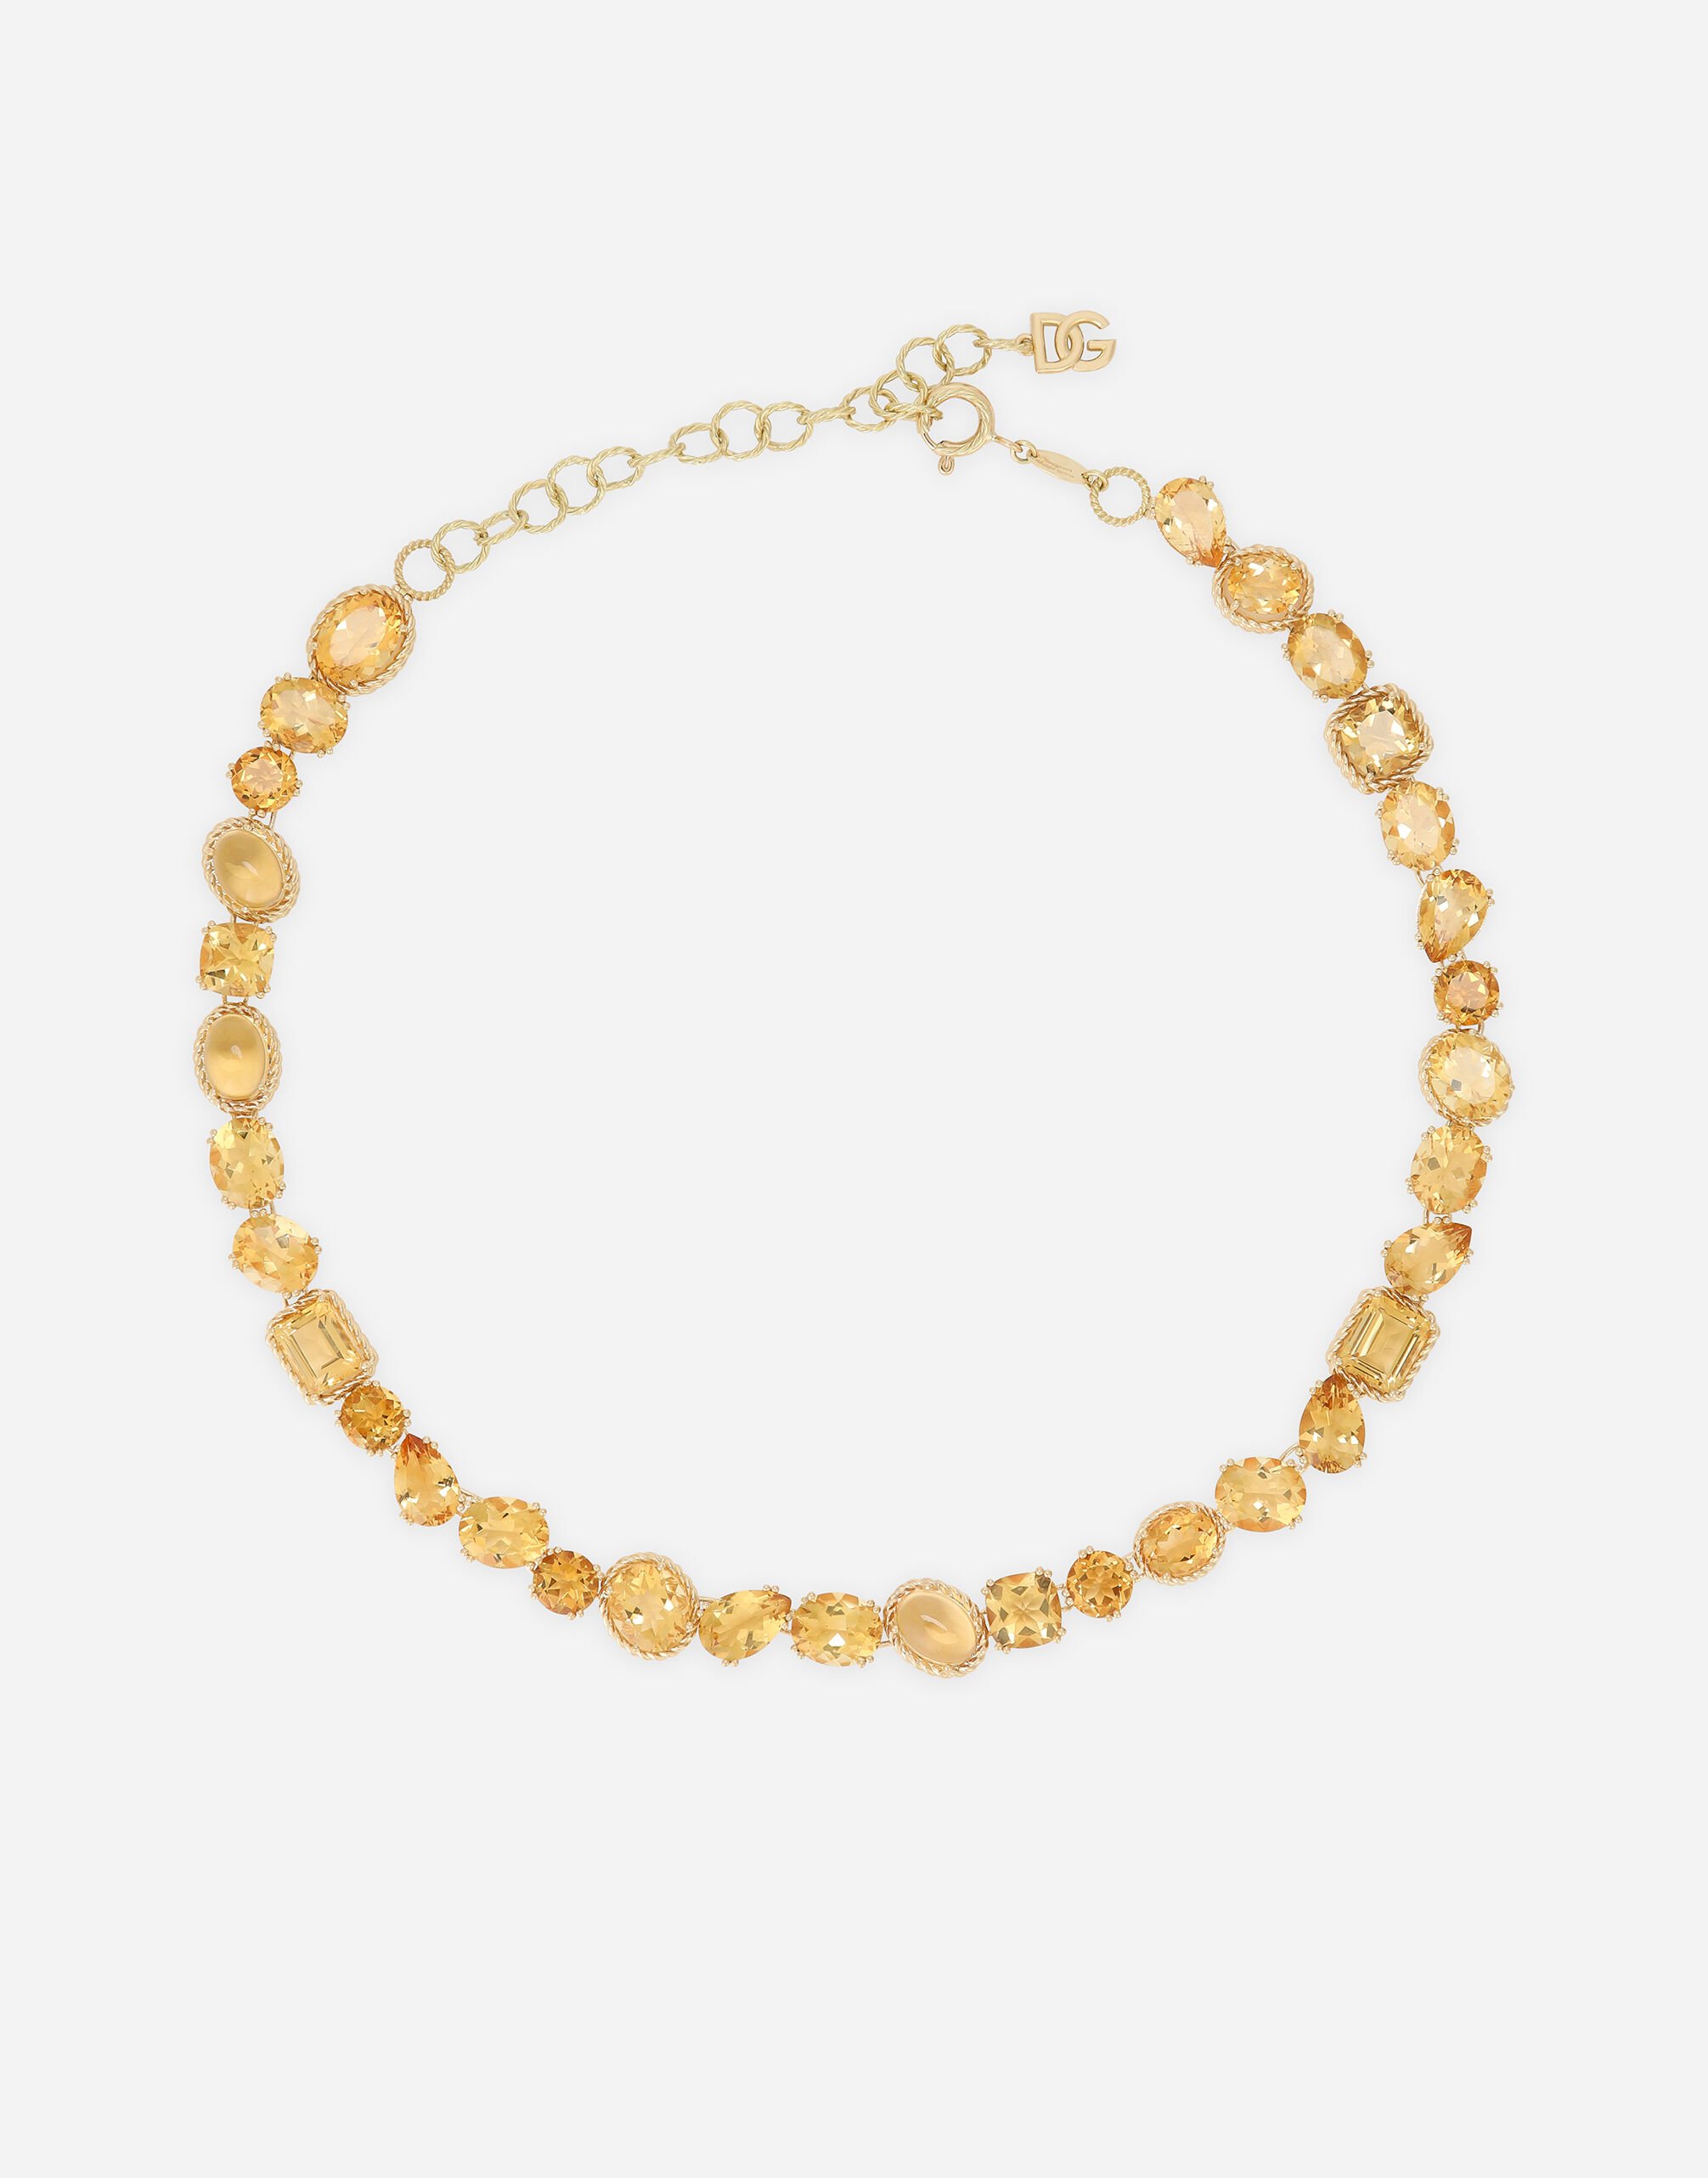 Dolce & Gabbana Anna necklace in yellow gold 18kt with citrines Gold WNQA3GWQC01